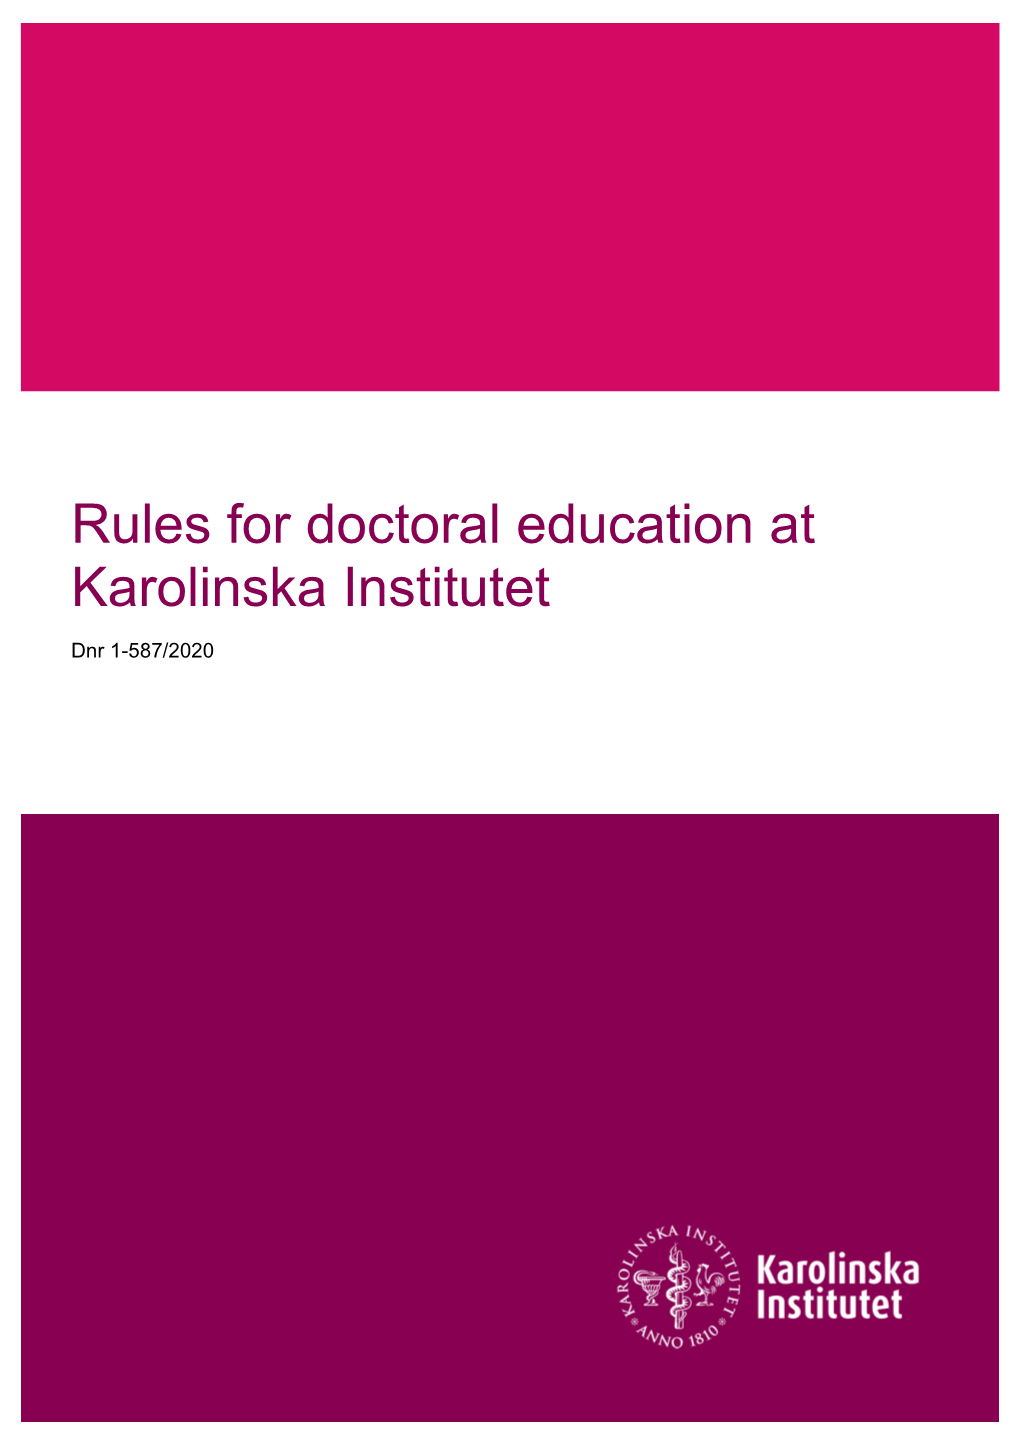 Rules for Doctoral Education at KI